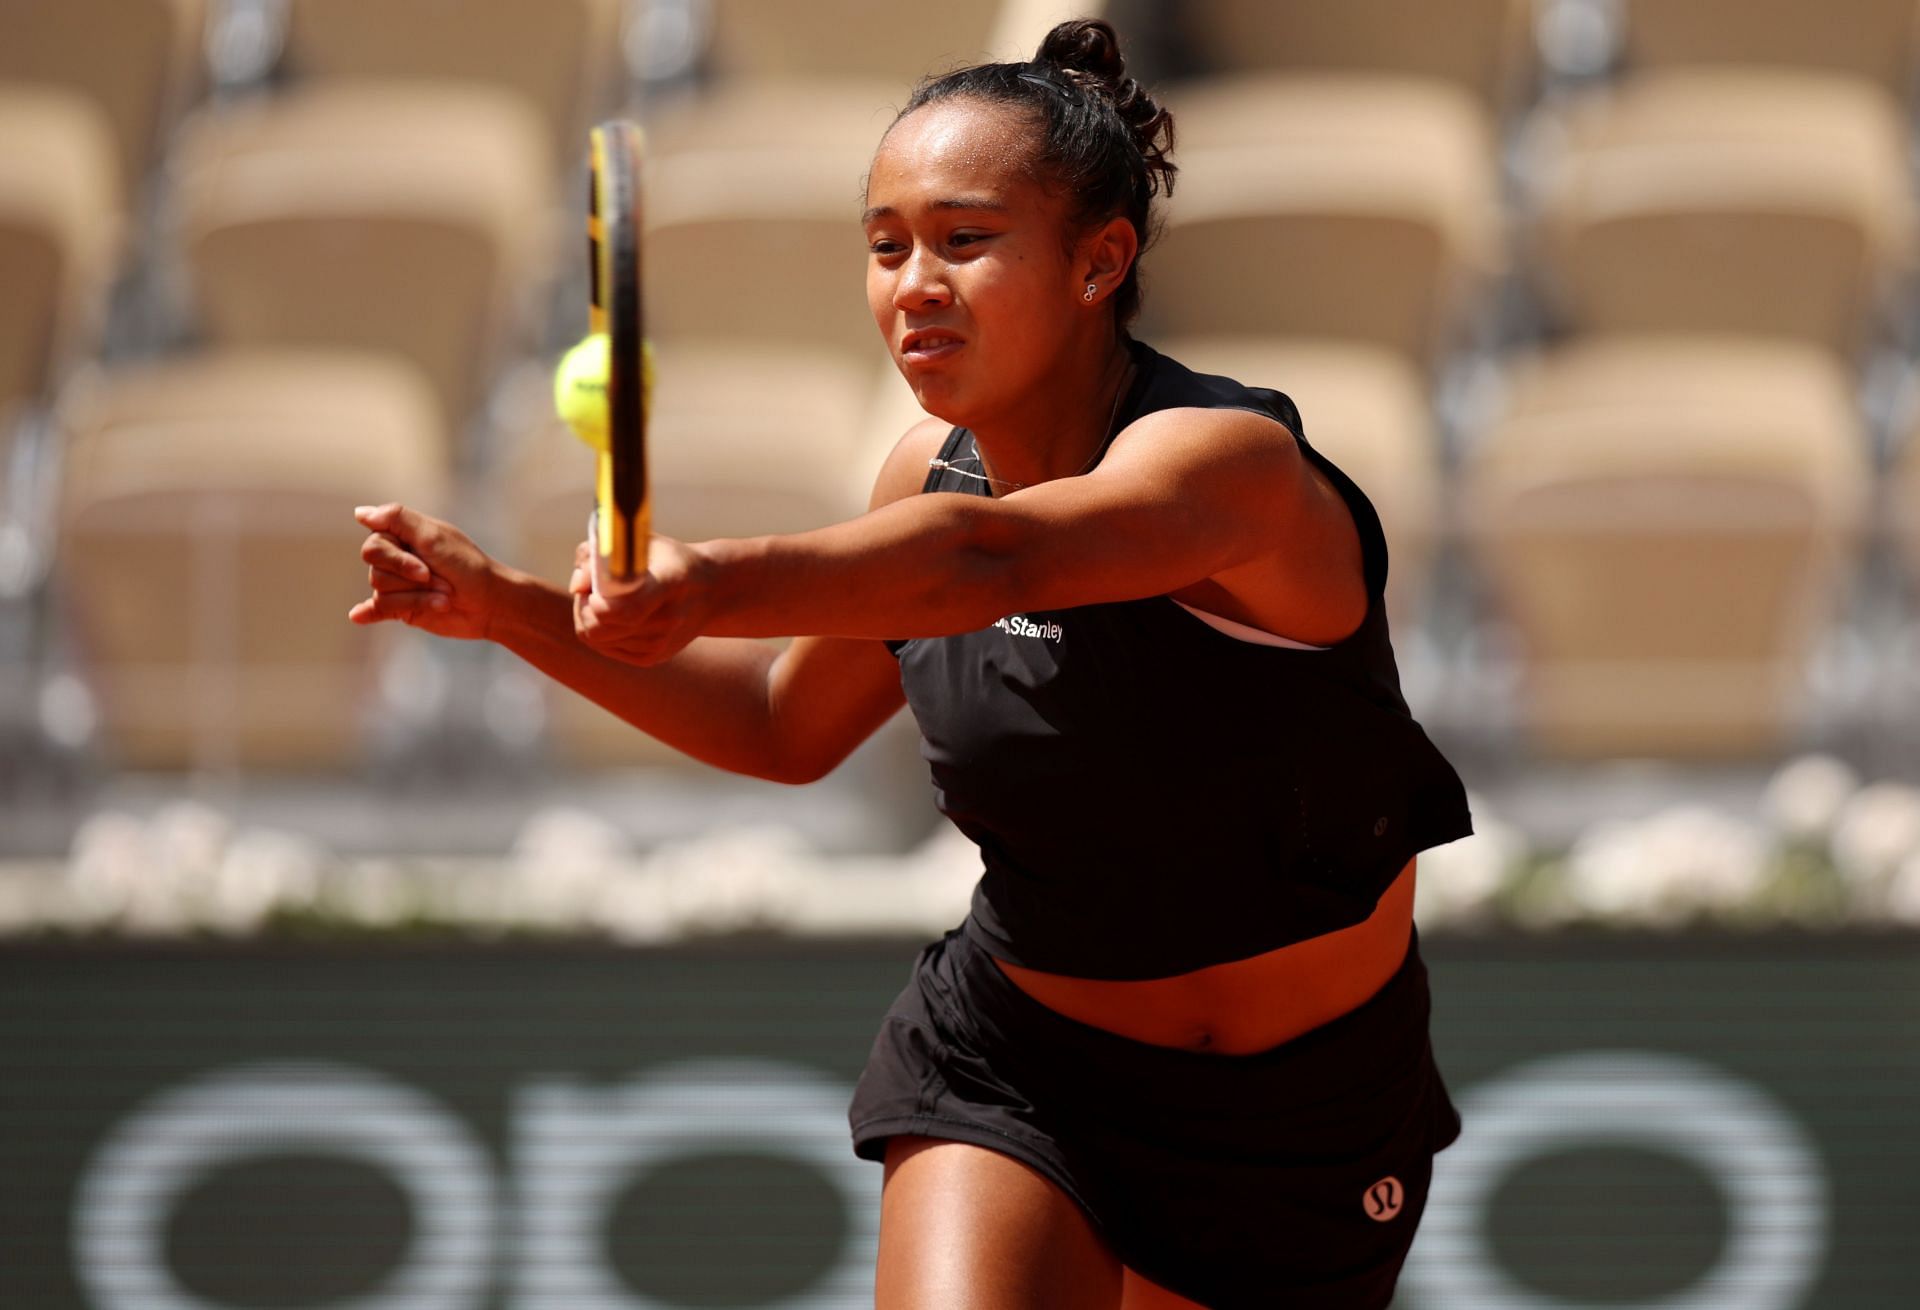 Fernandez in action at the 2022 French Open